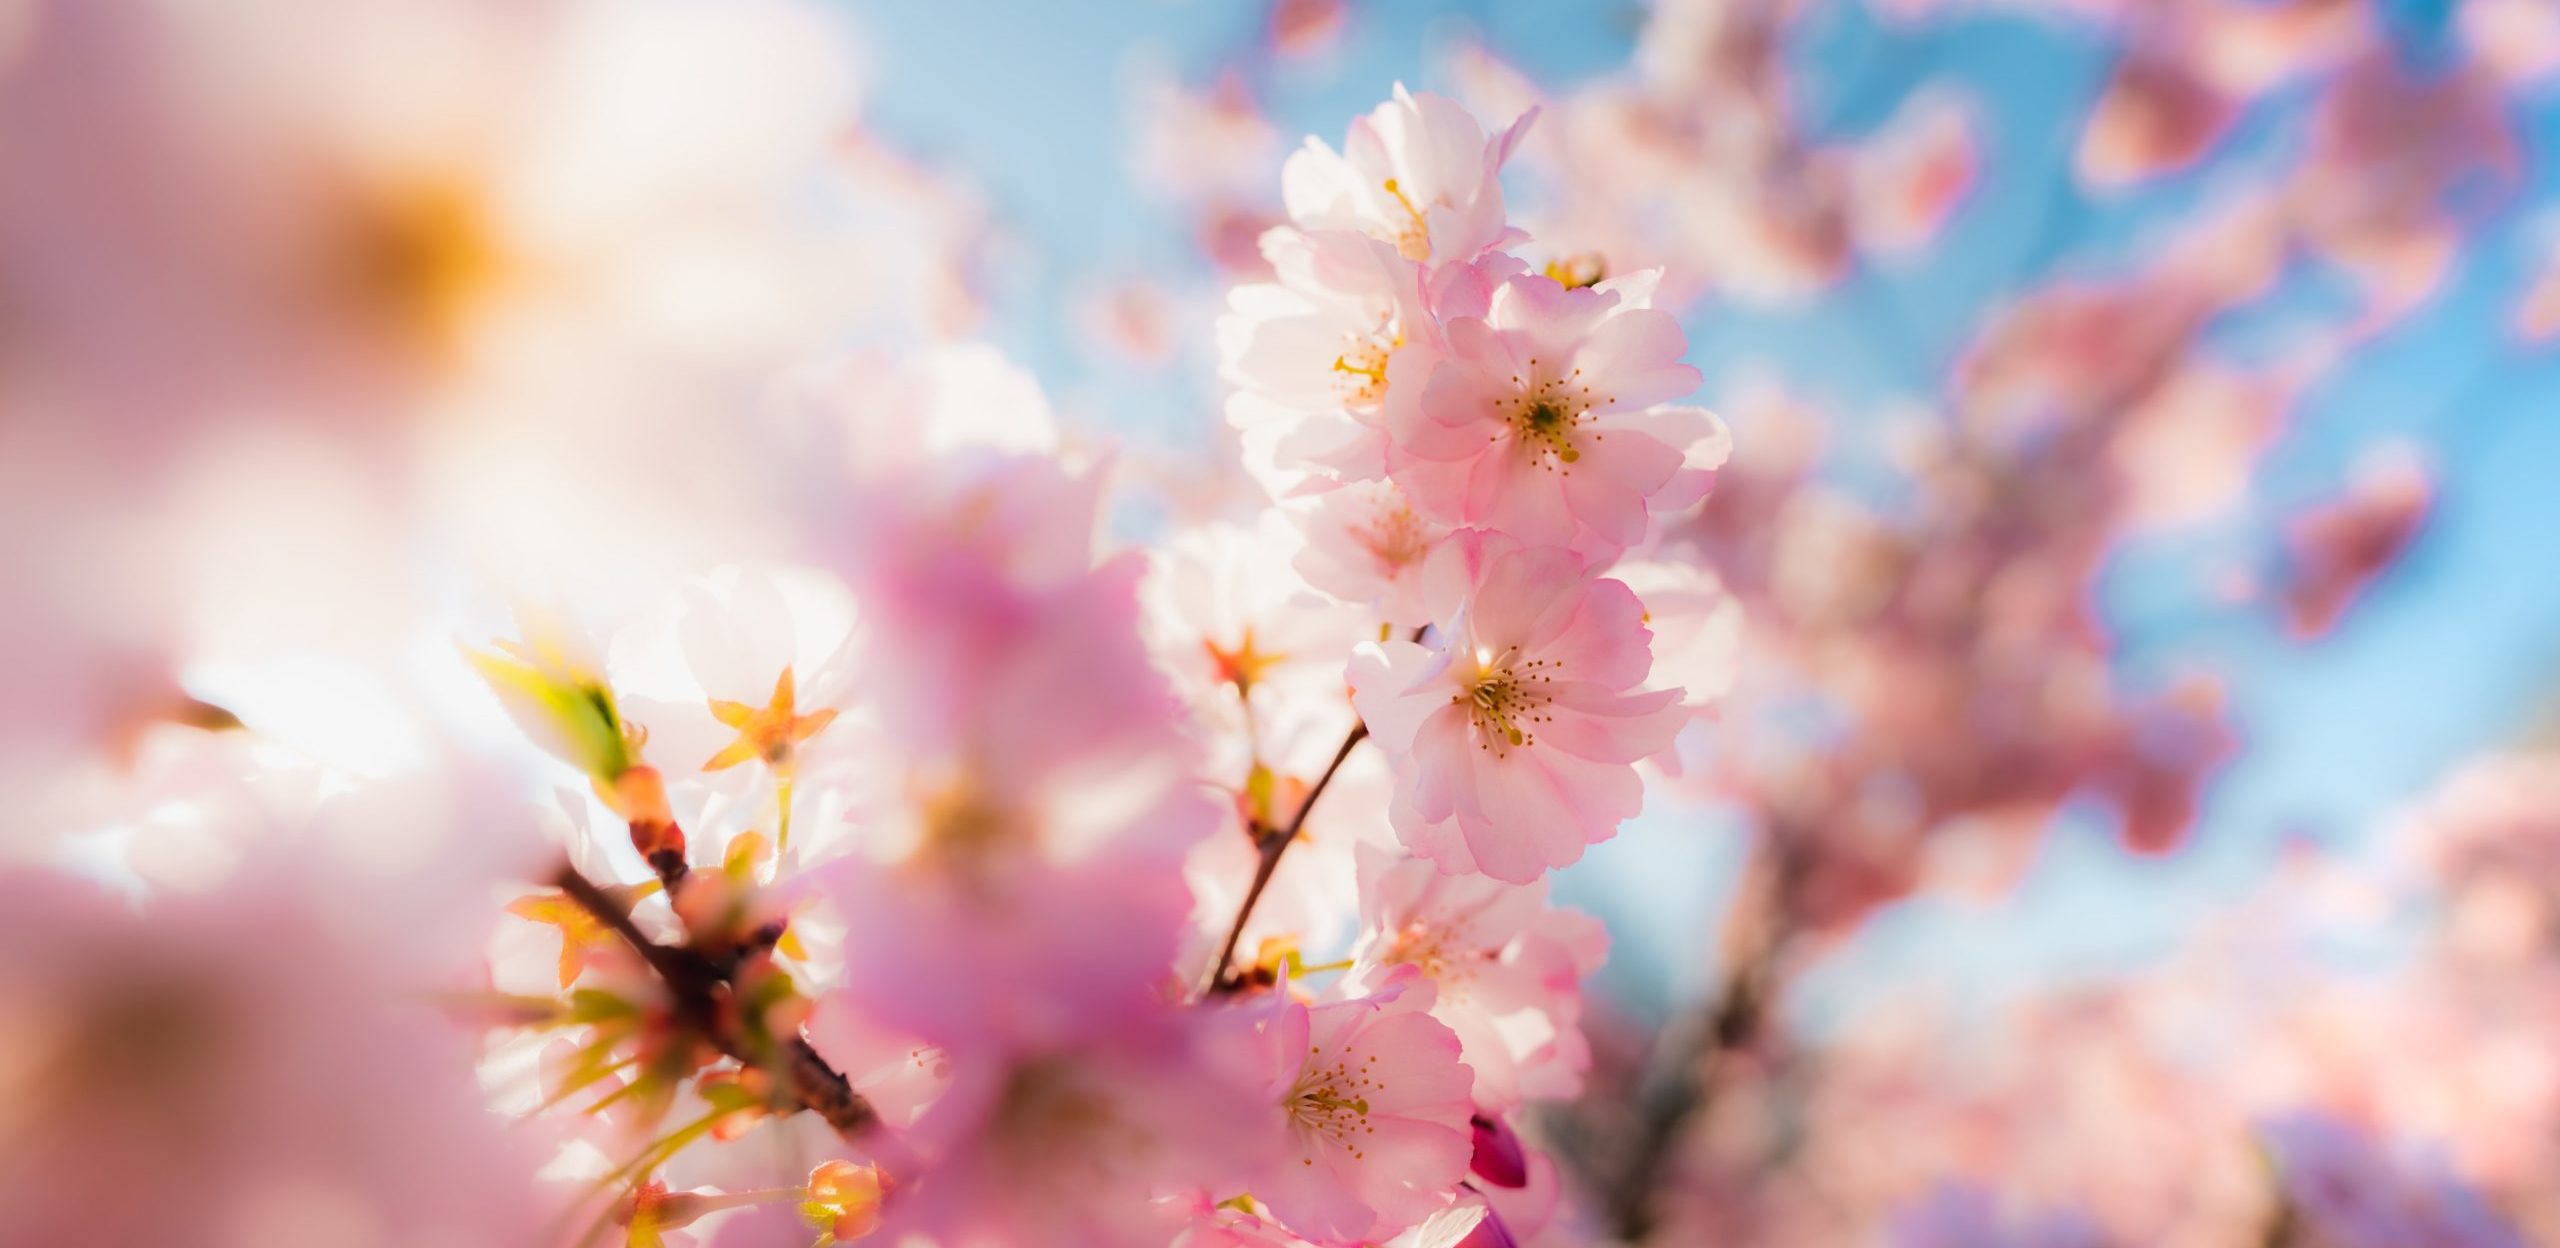 a close-up picture of cherry blossoms